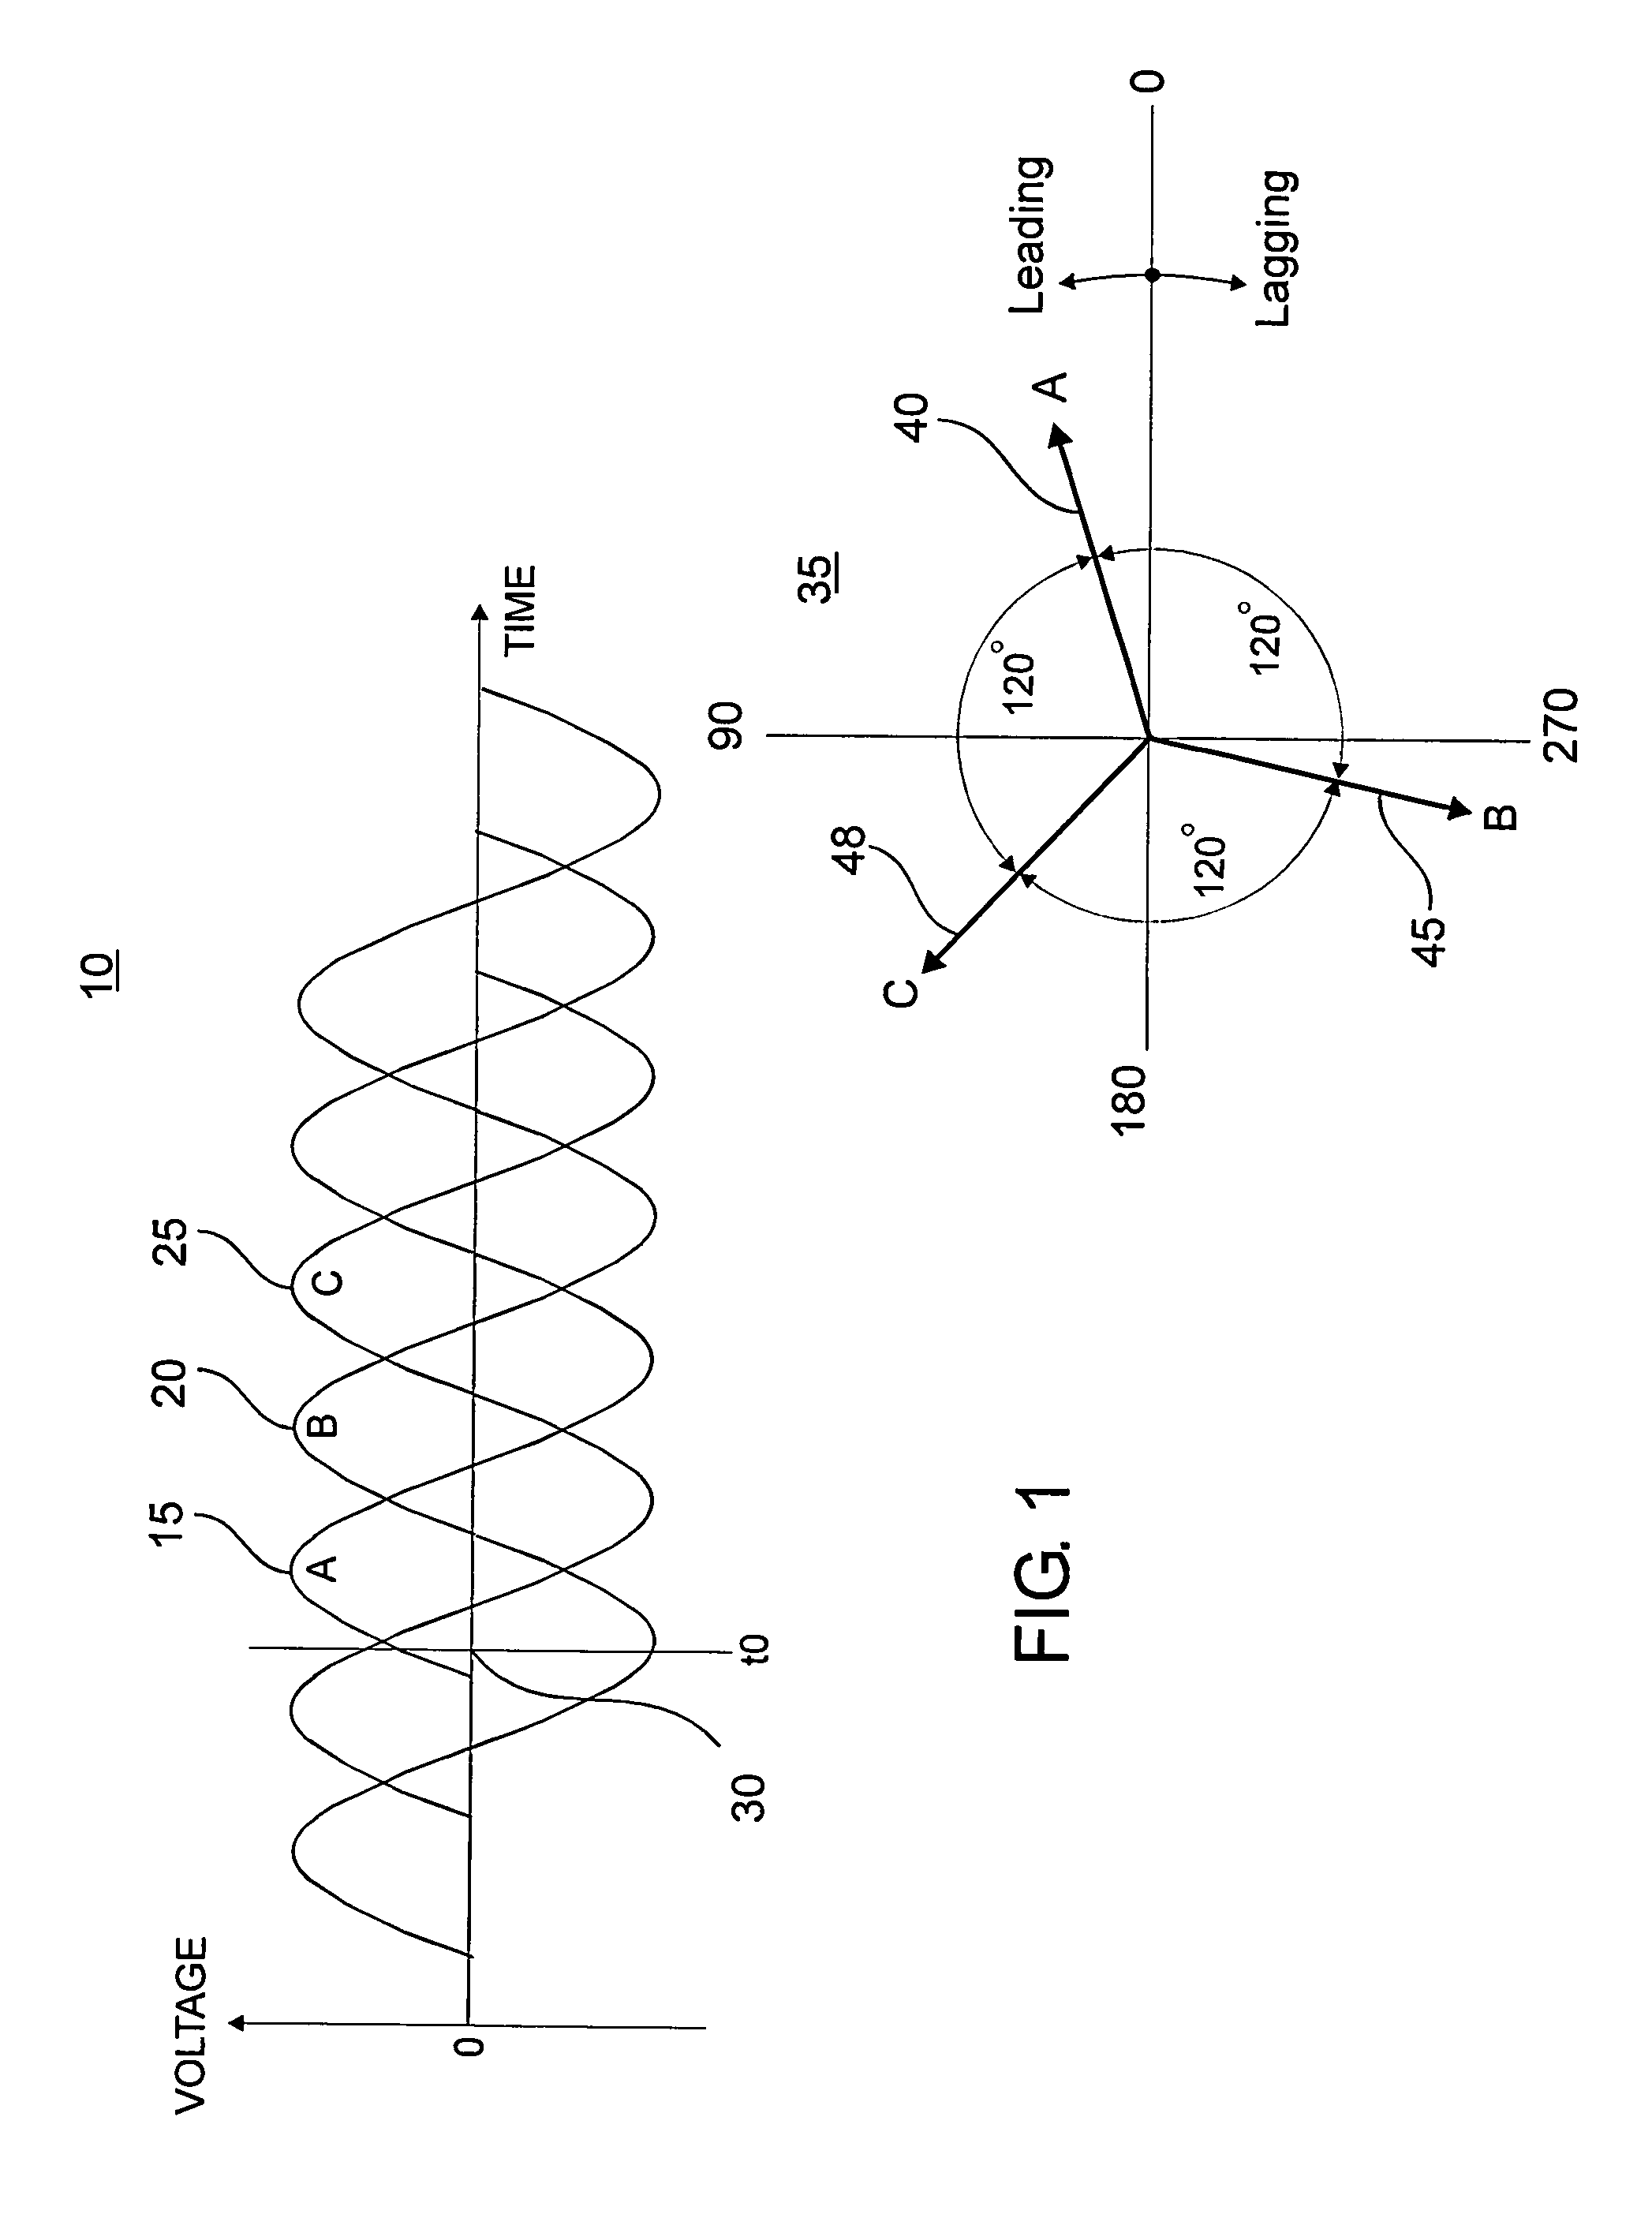 Method and apparatus for phase identification in a three-phase power distribution network